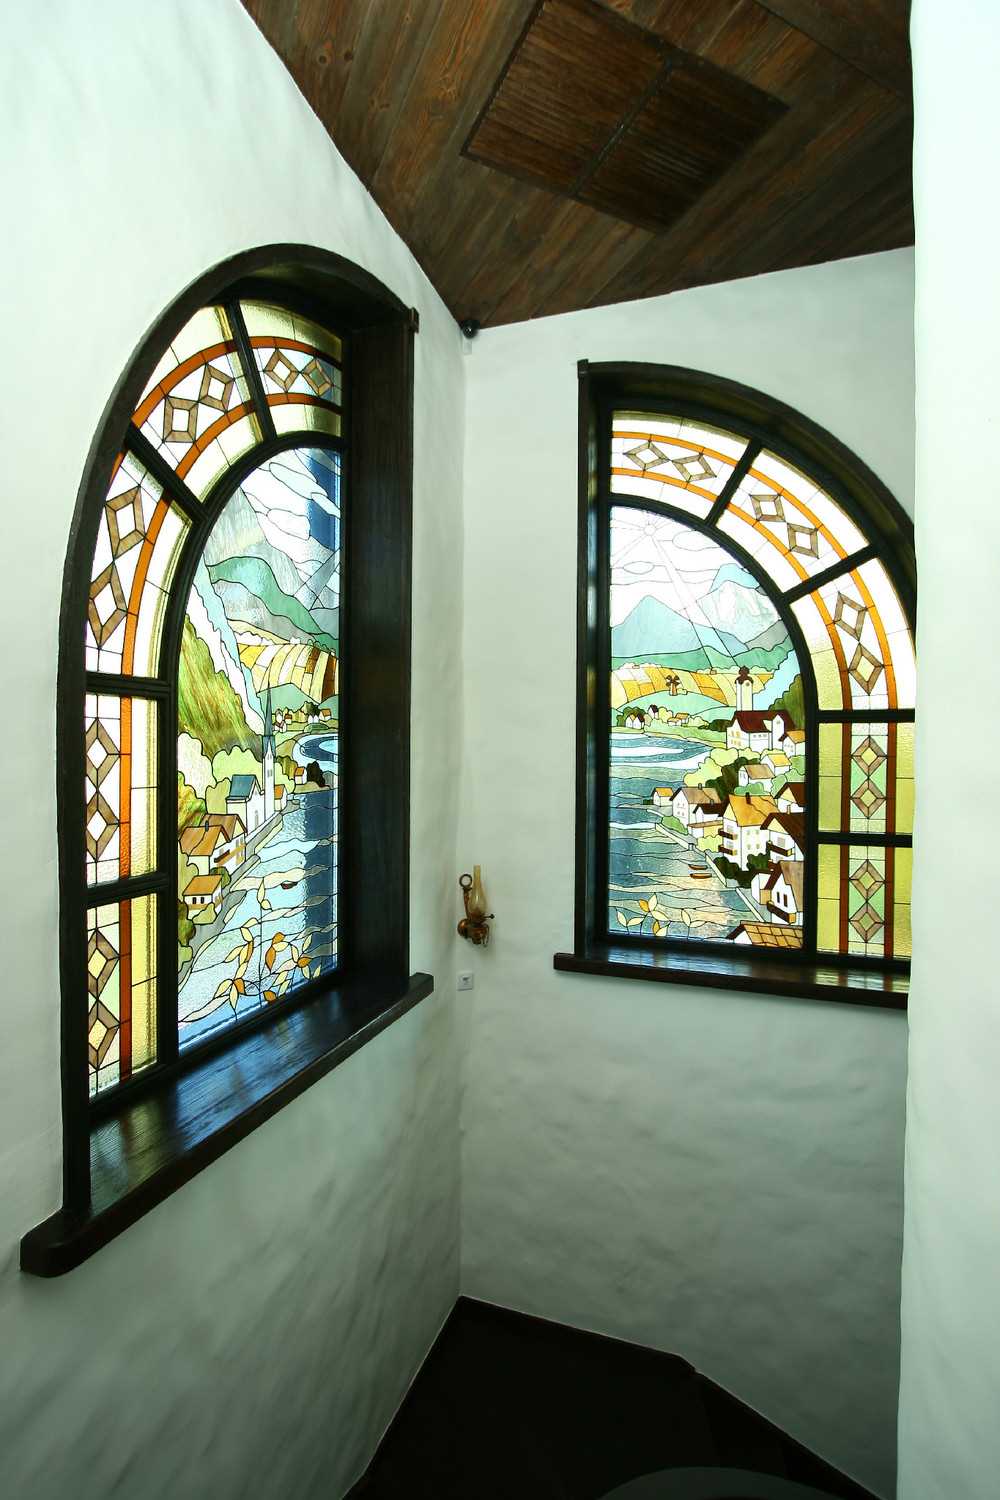 fusing stained glass window in the design of the bedroom